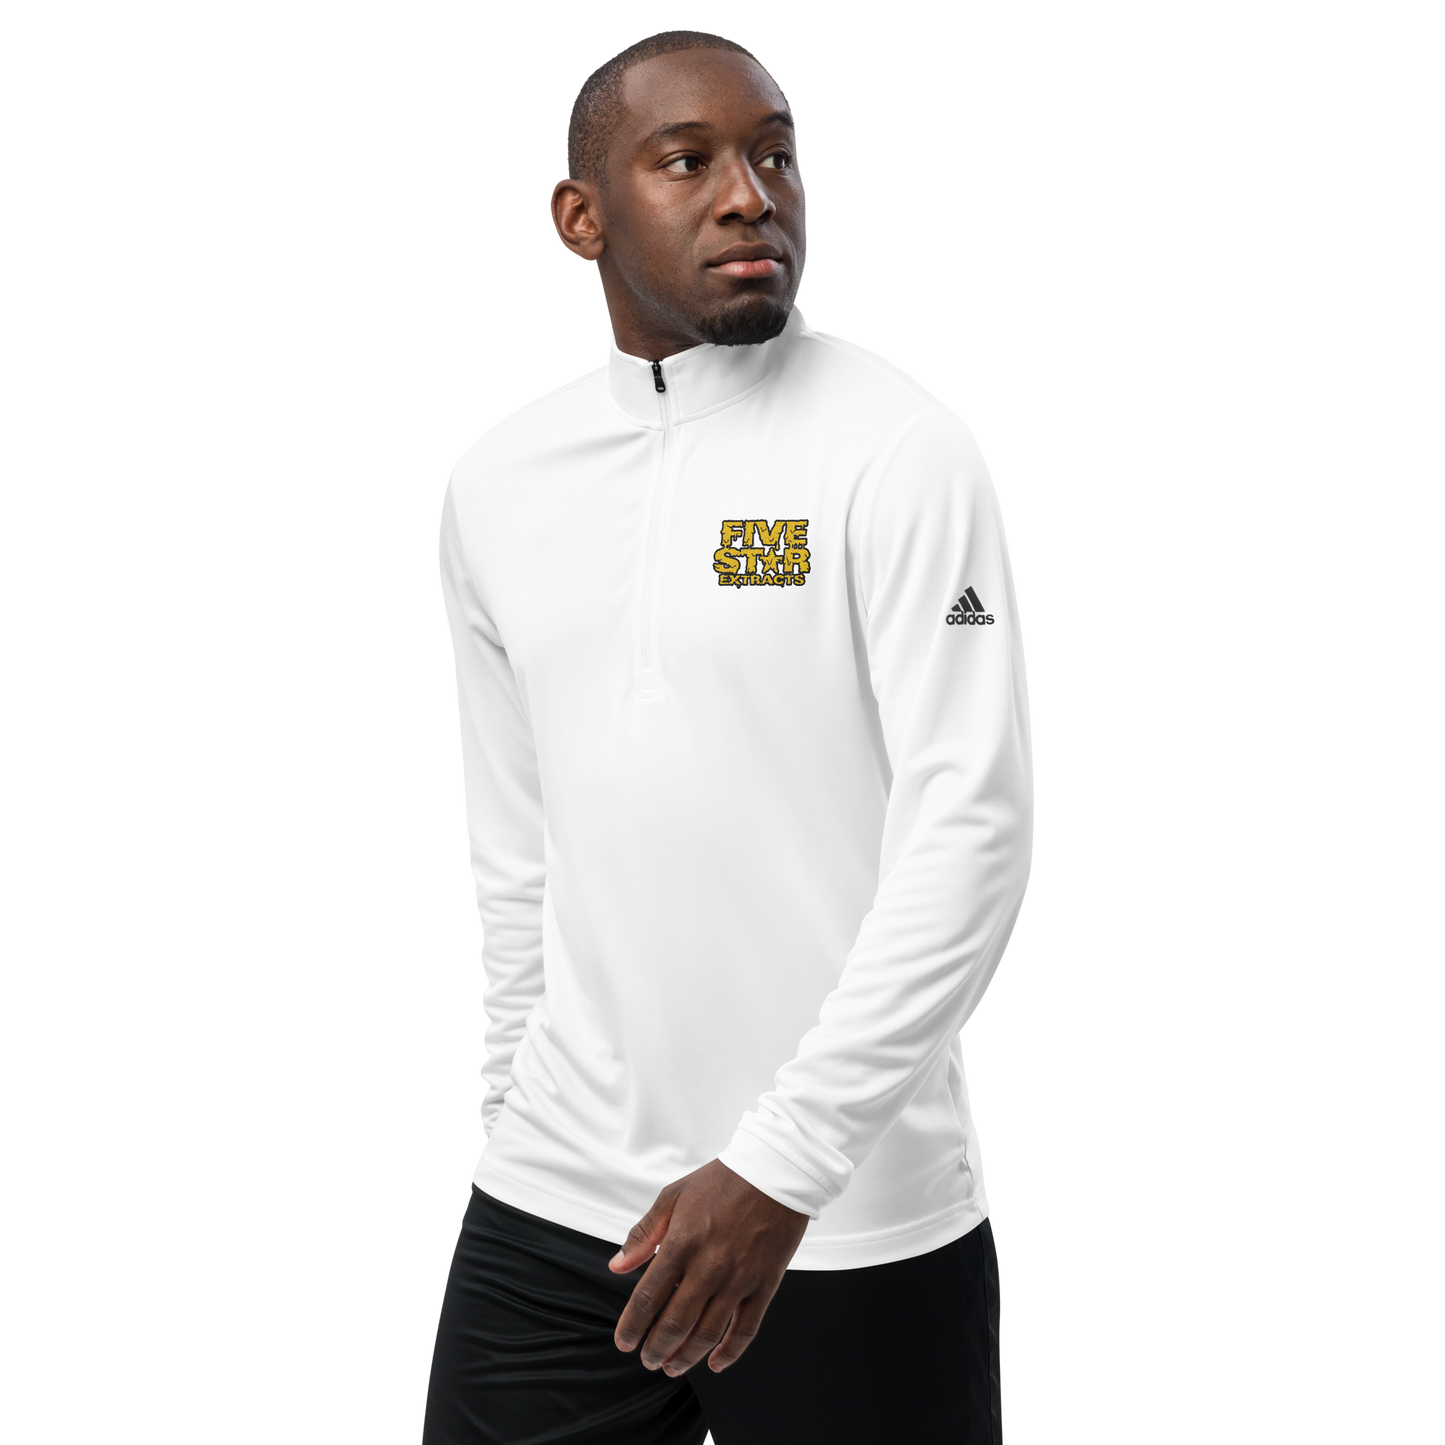 Five Star Extracts - Adidas Quarter zip pullover